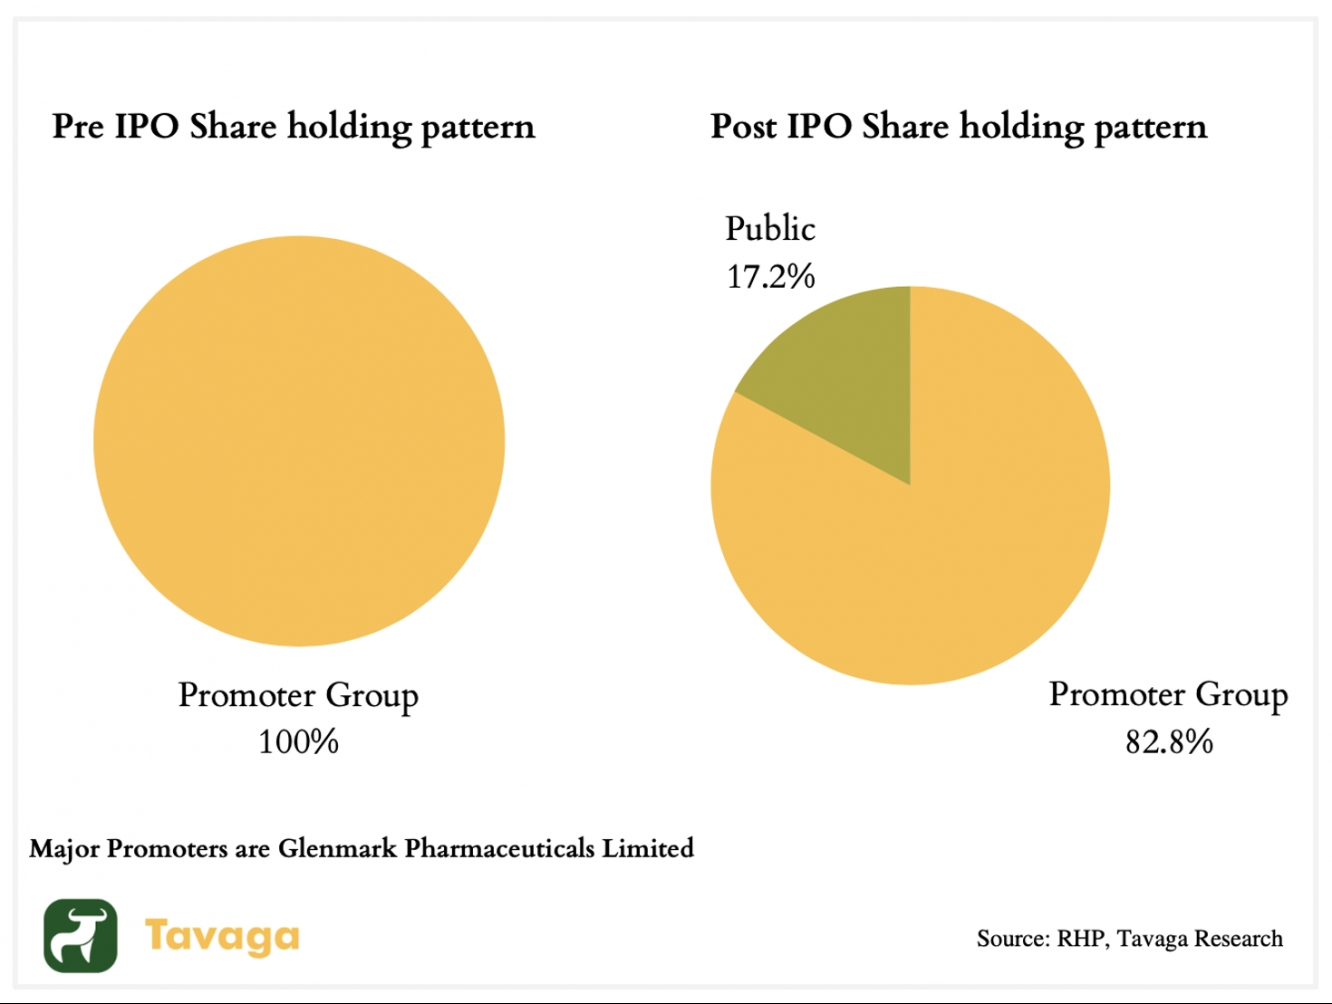 Shareholding Pre and Post IPO